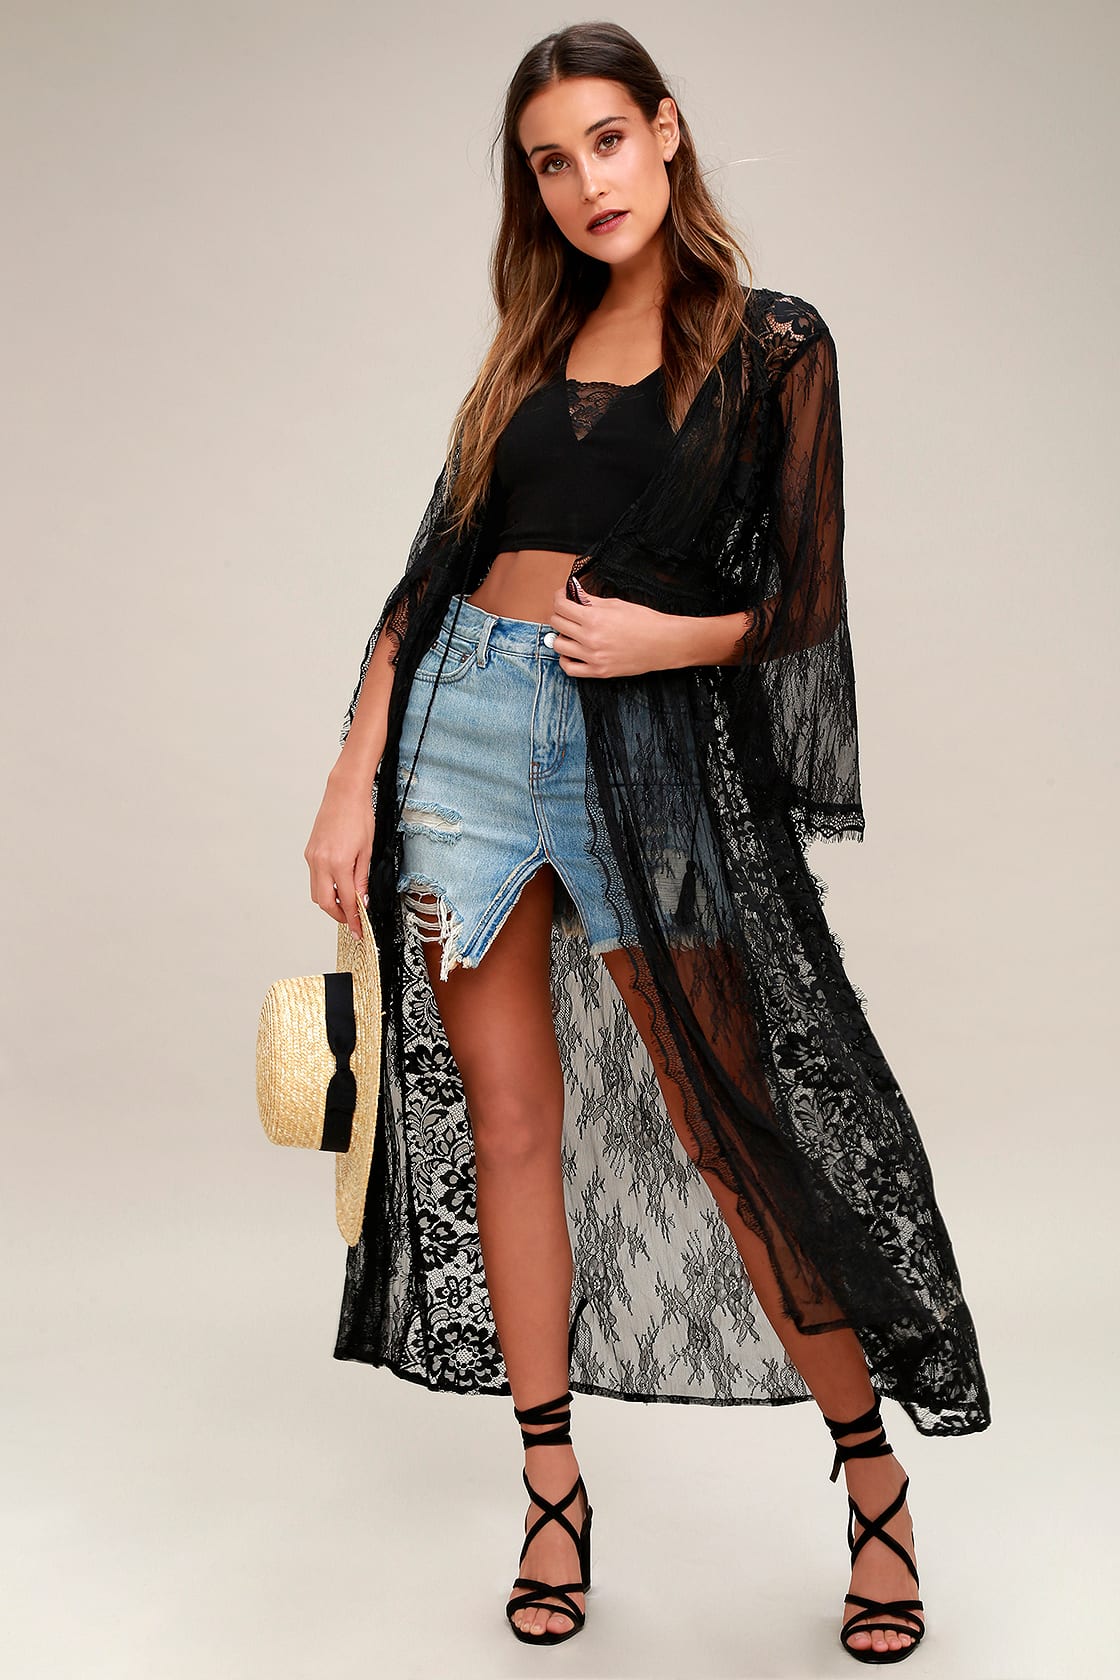 Free People Chelsea Robe - Black Lace Robe - Sexy Lace Robe - Lulus